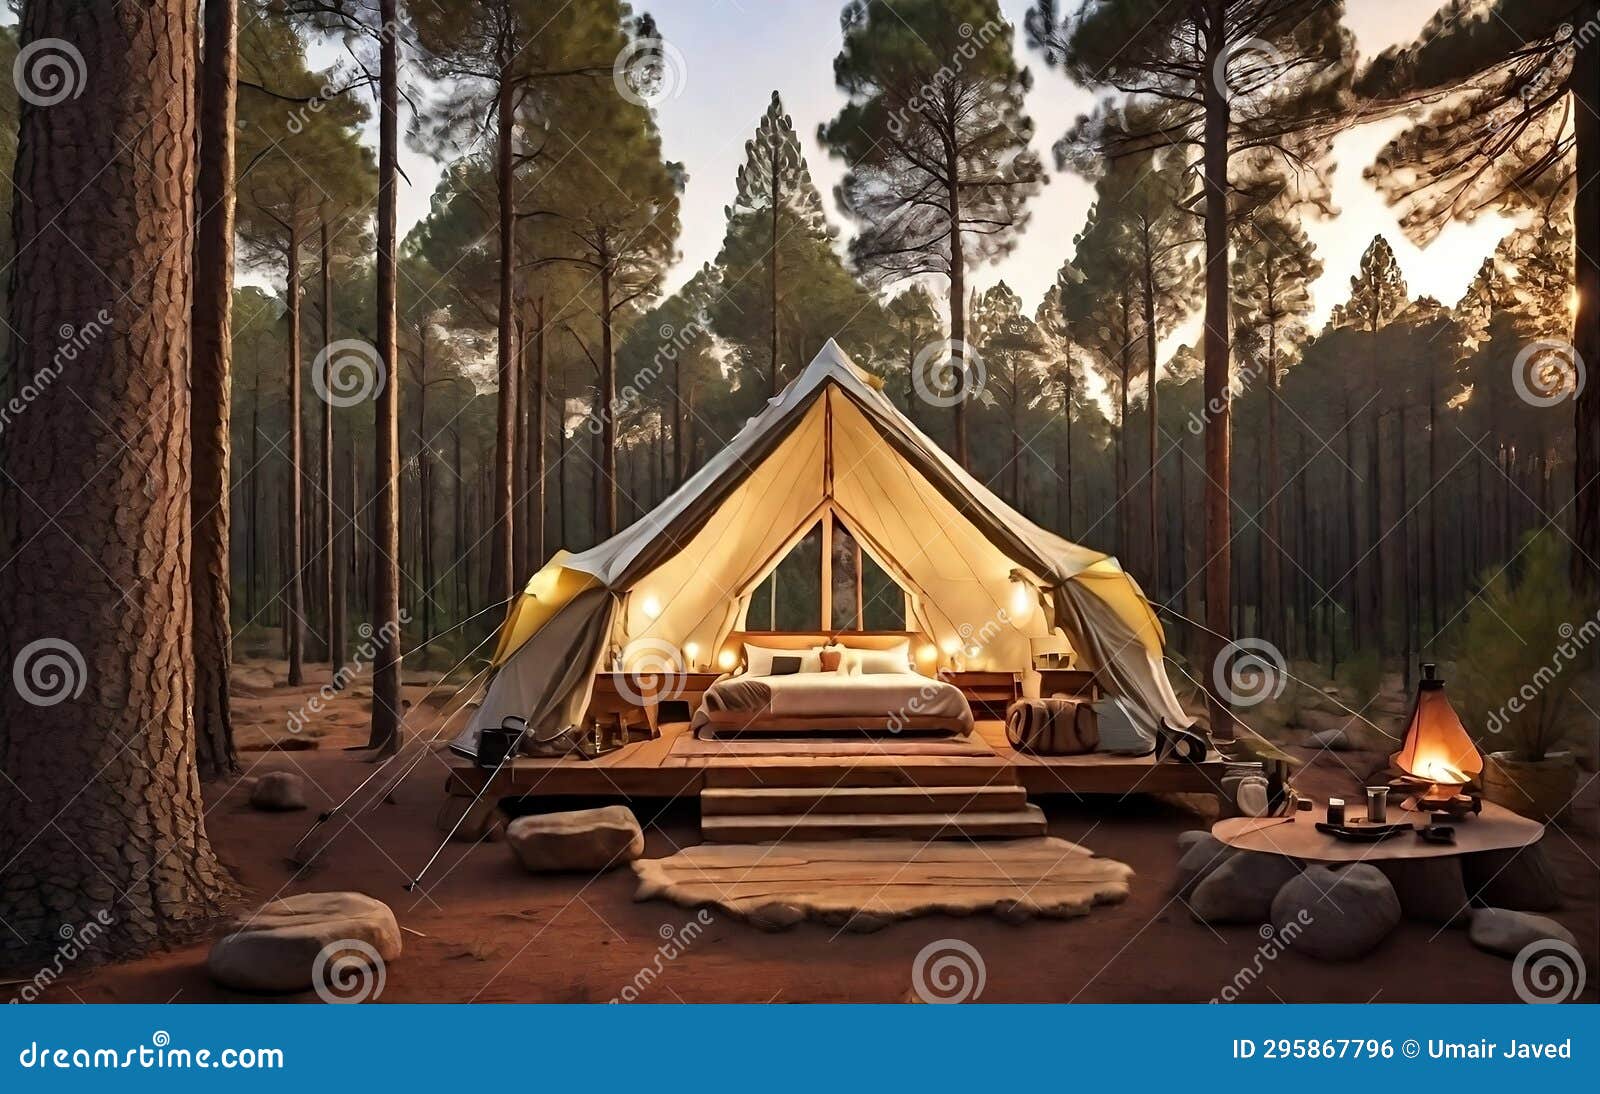 pine forest retreat as the sun sets, a cozy luxuries camping tent stands amidst a serene pine forest,